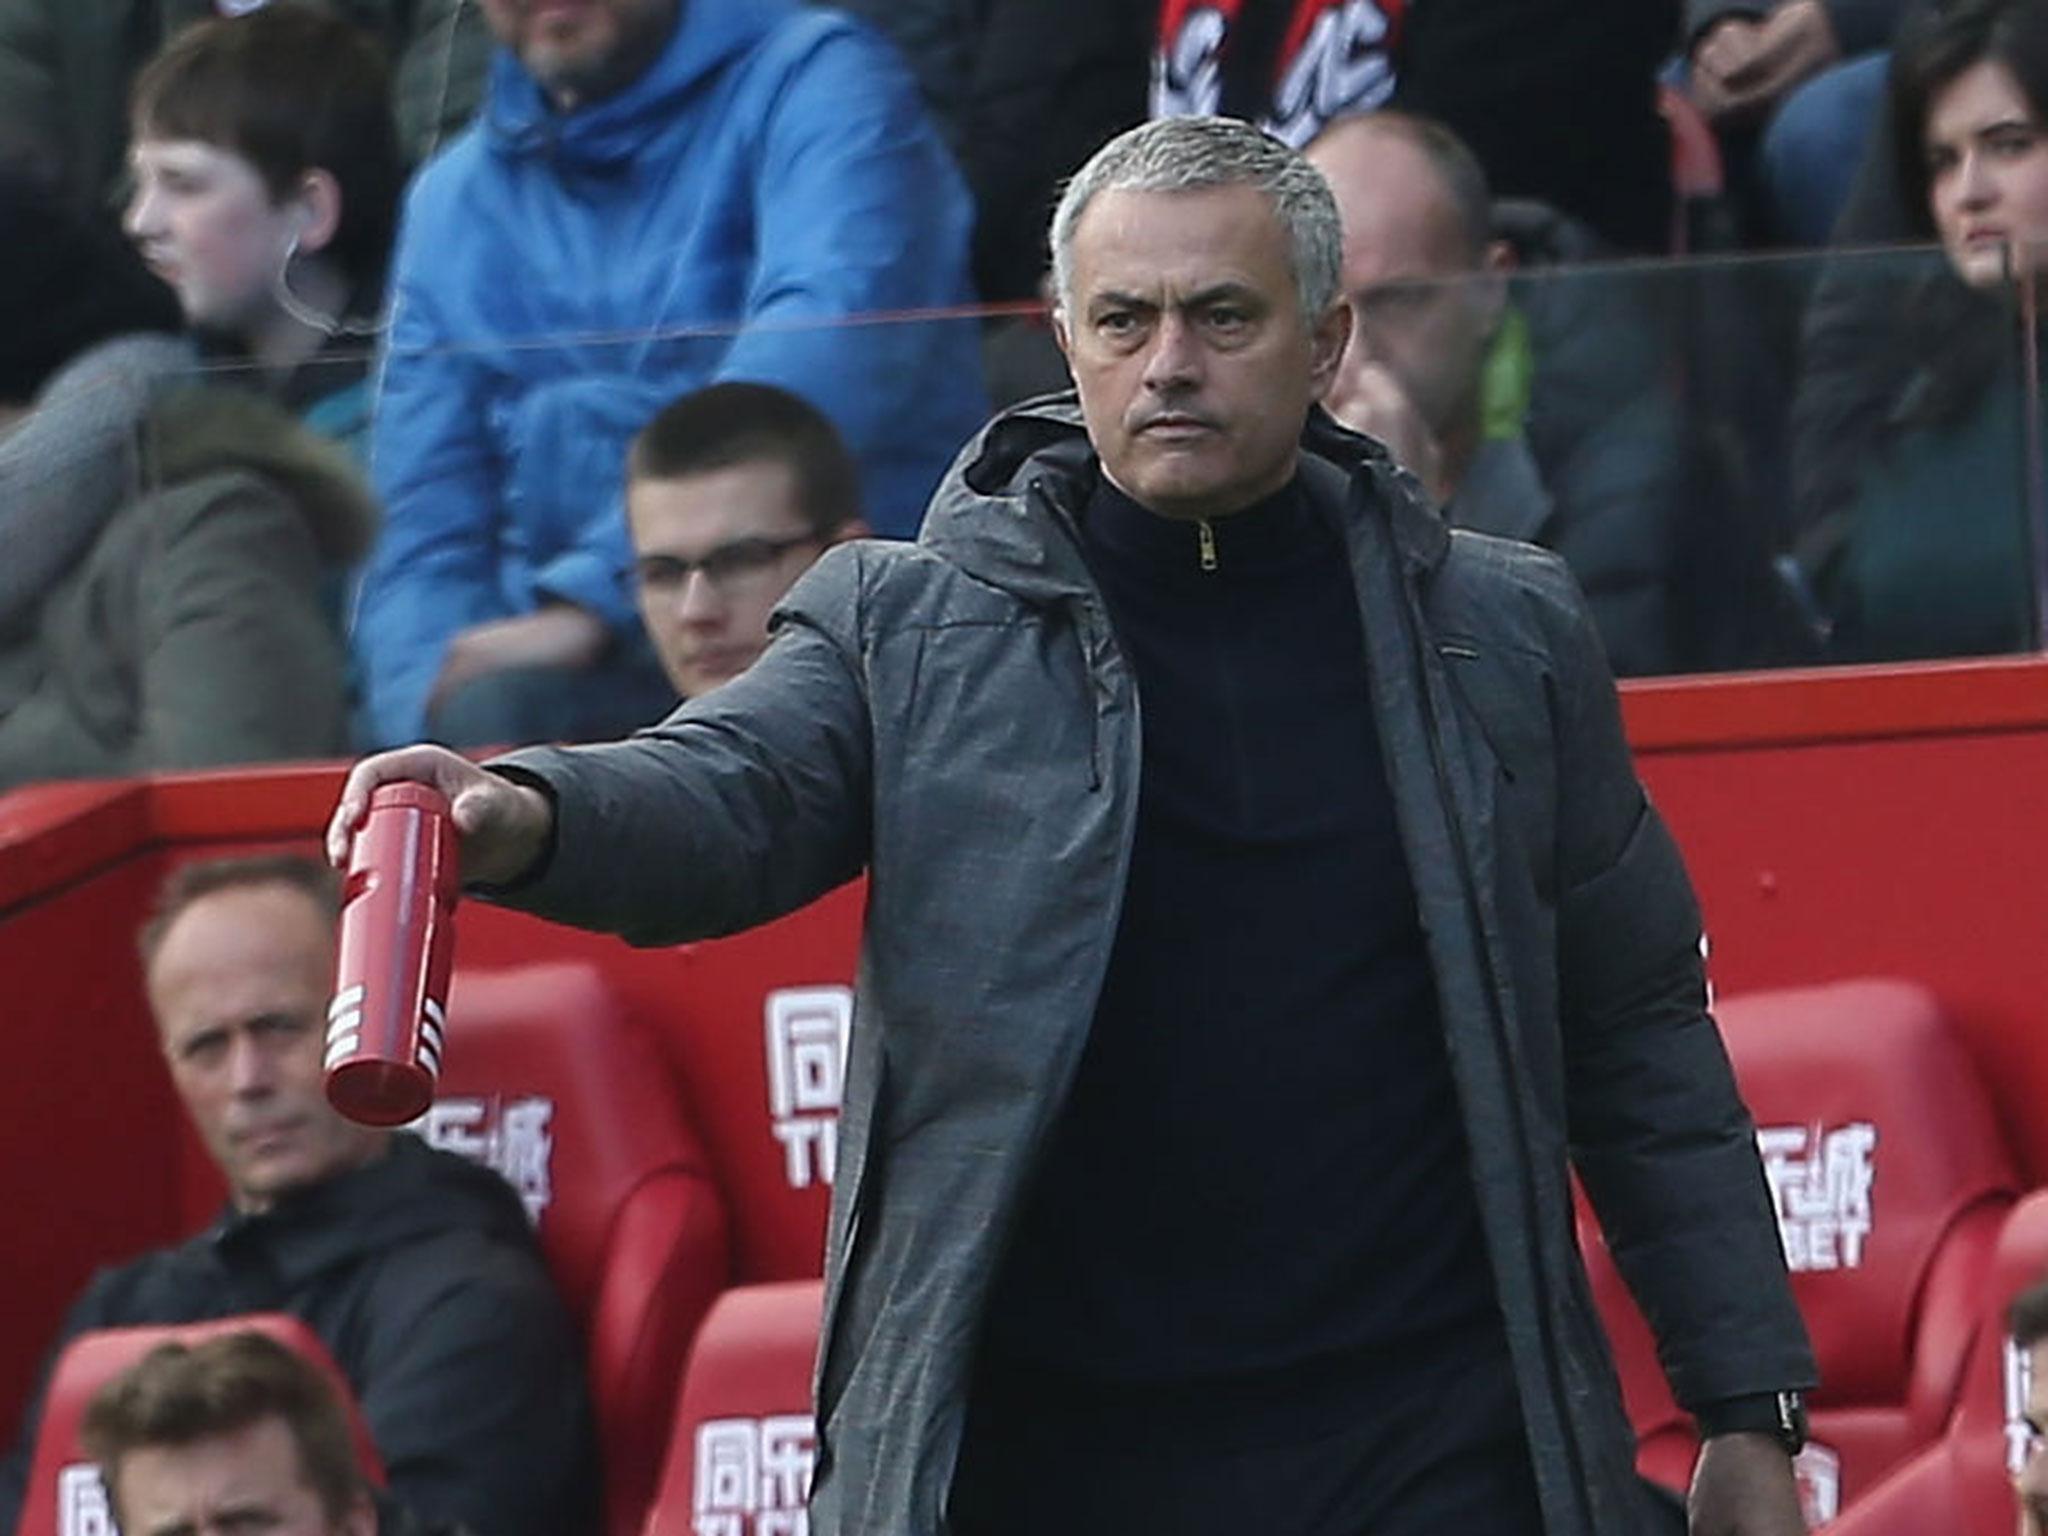 Jose Mourinho watched his team eventually overcome Middlesbrough